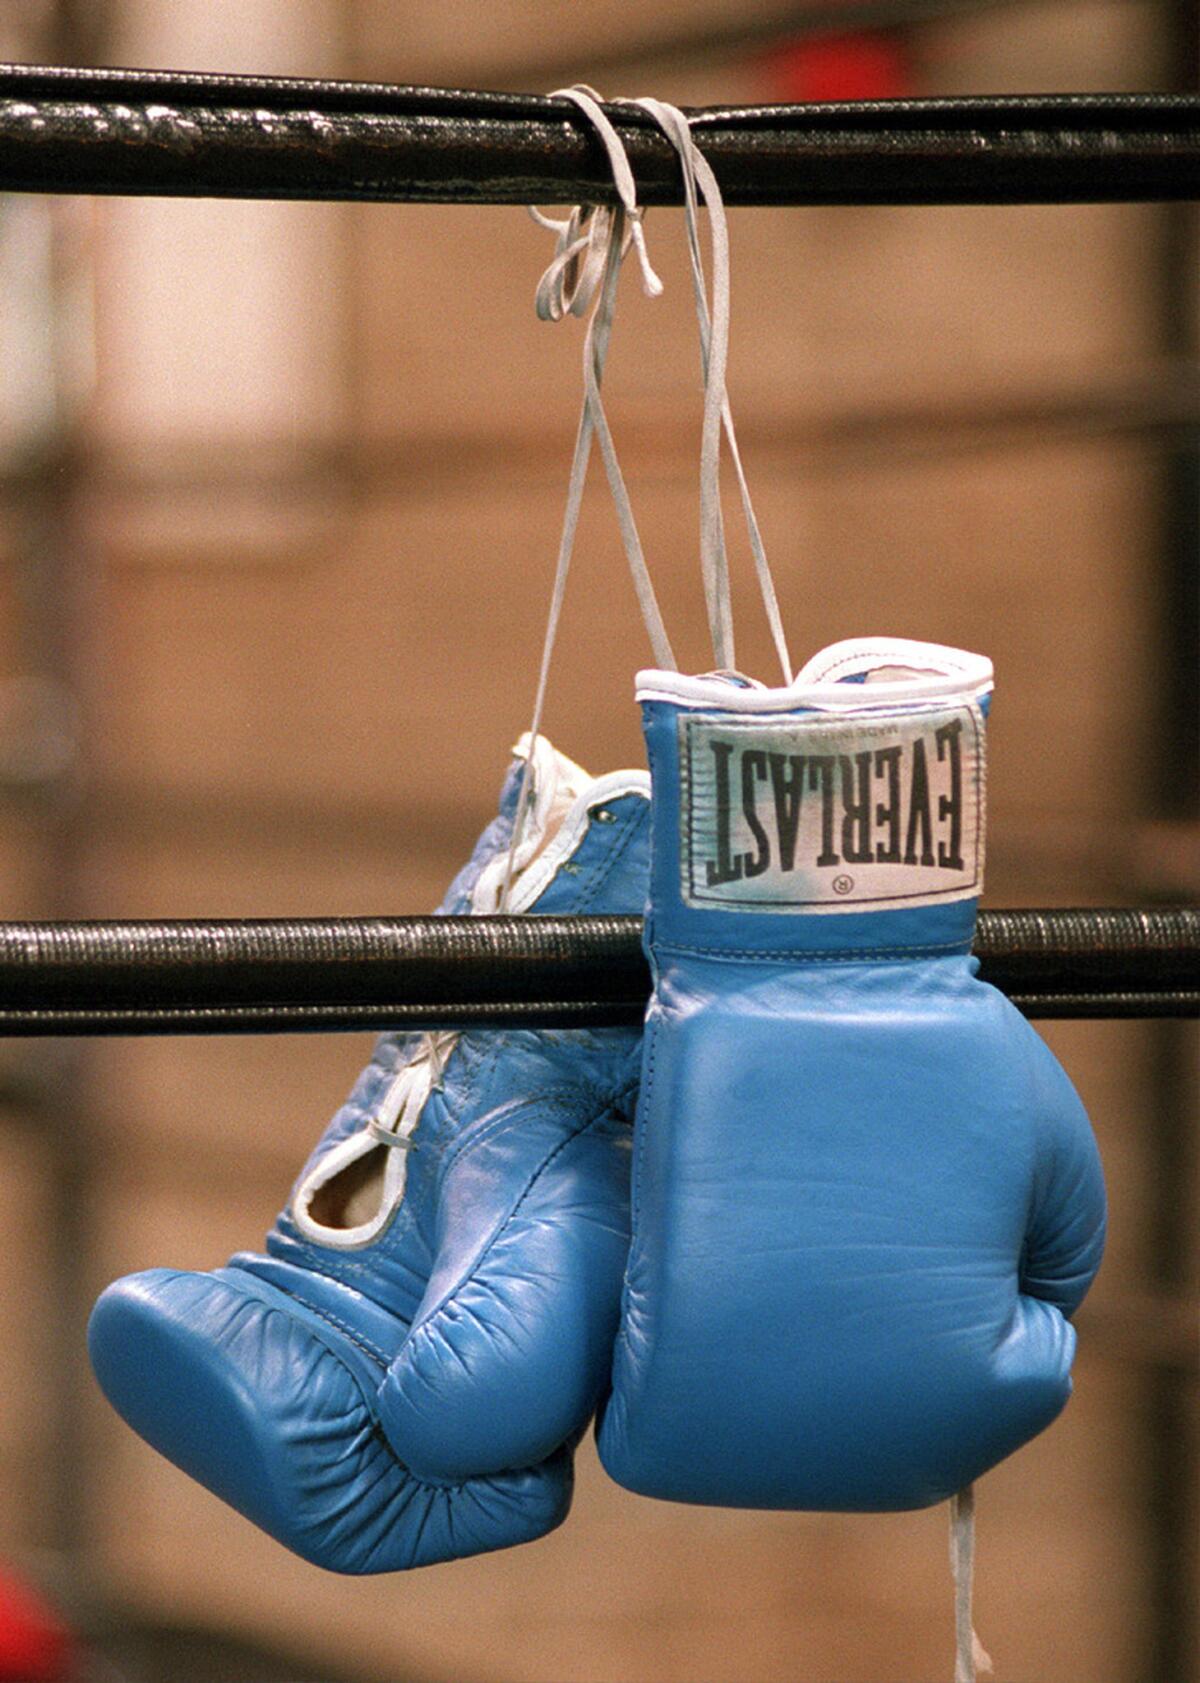 Boxing gloves hang from the ring.